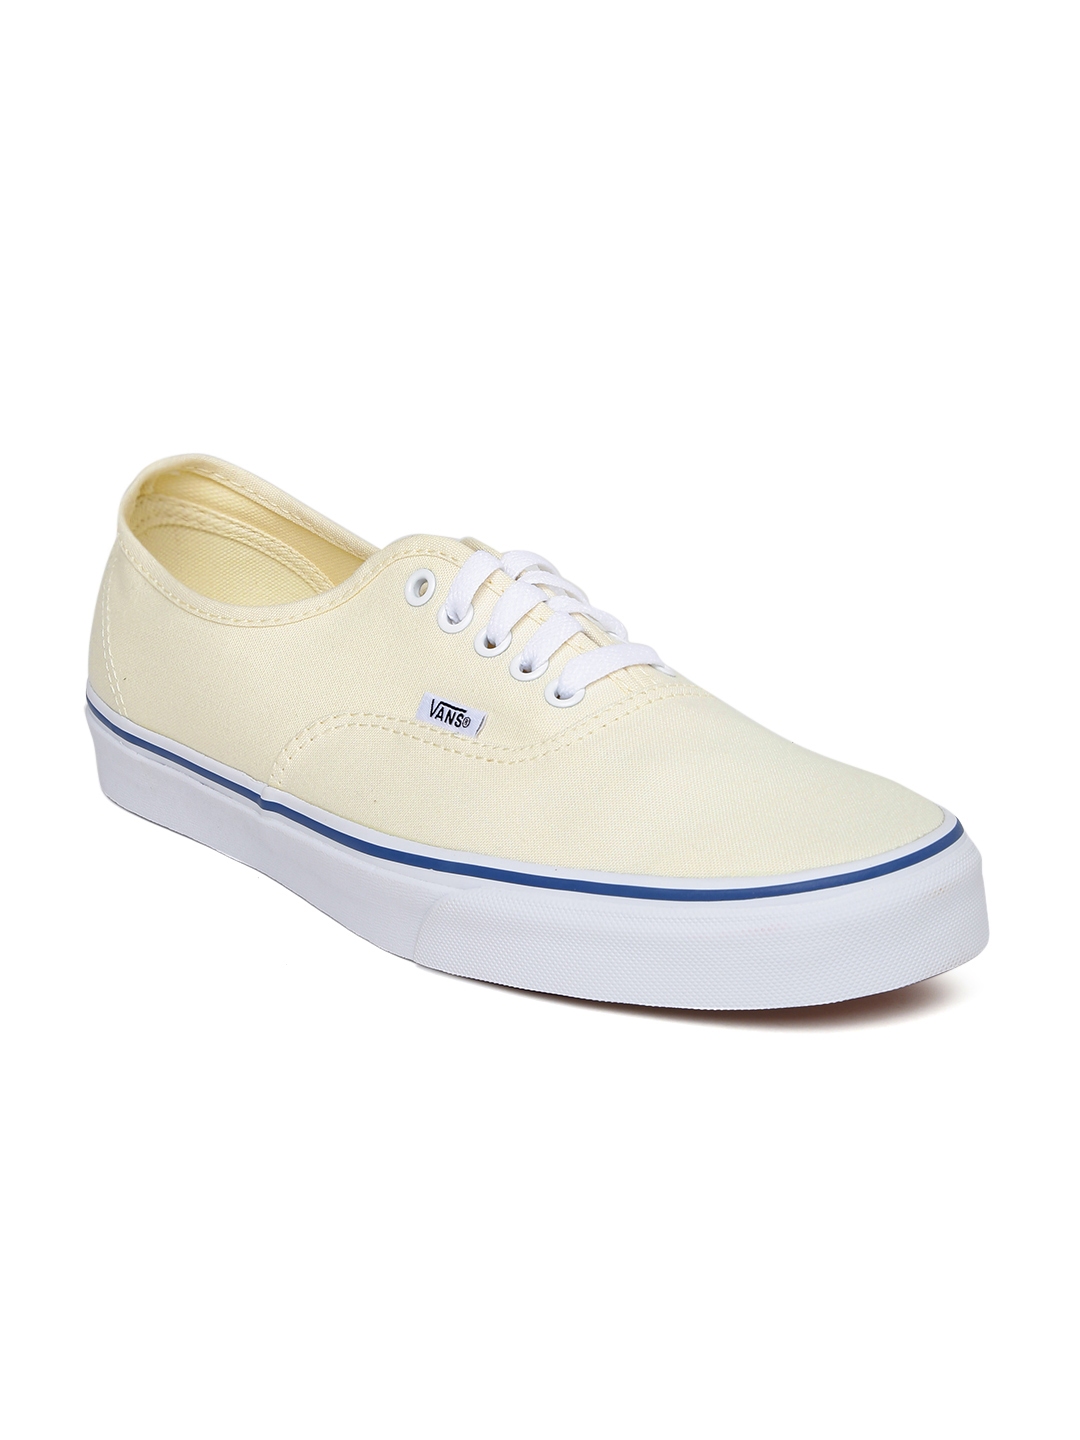 Buy Vans Unisex Cream Coloured Authentic Sneakers - Casual Shoes for